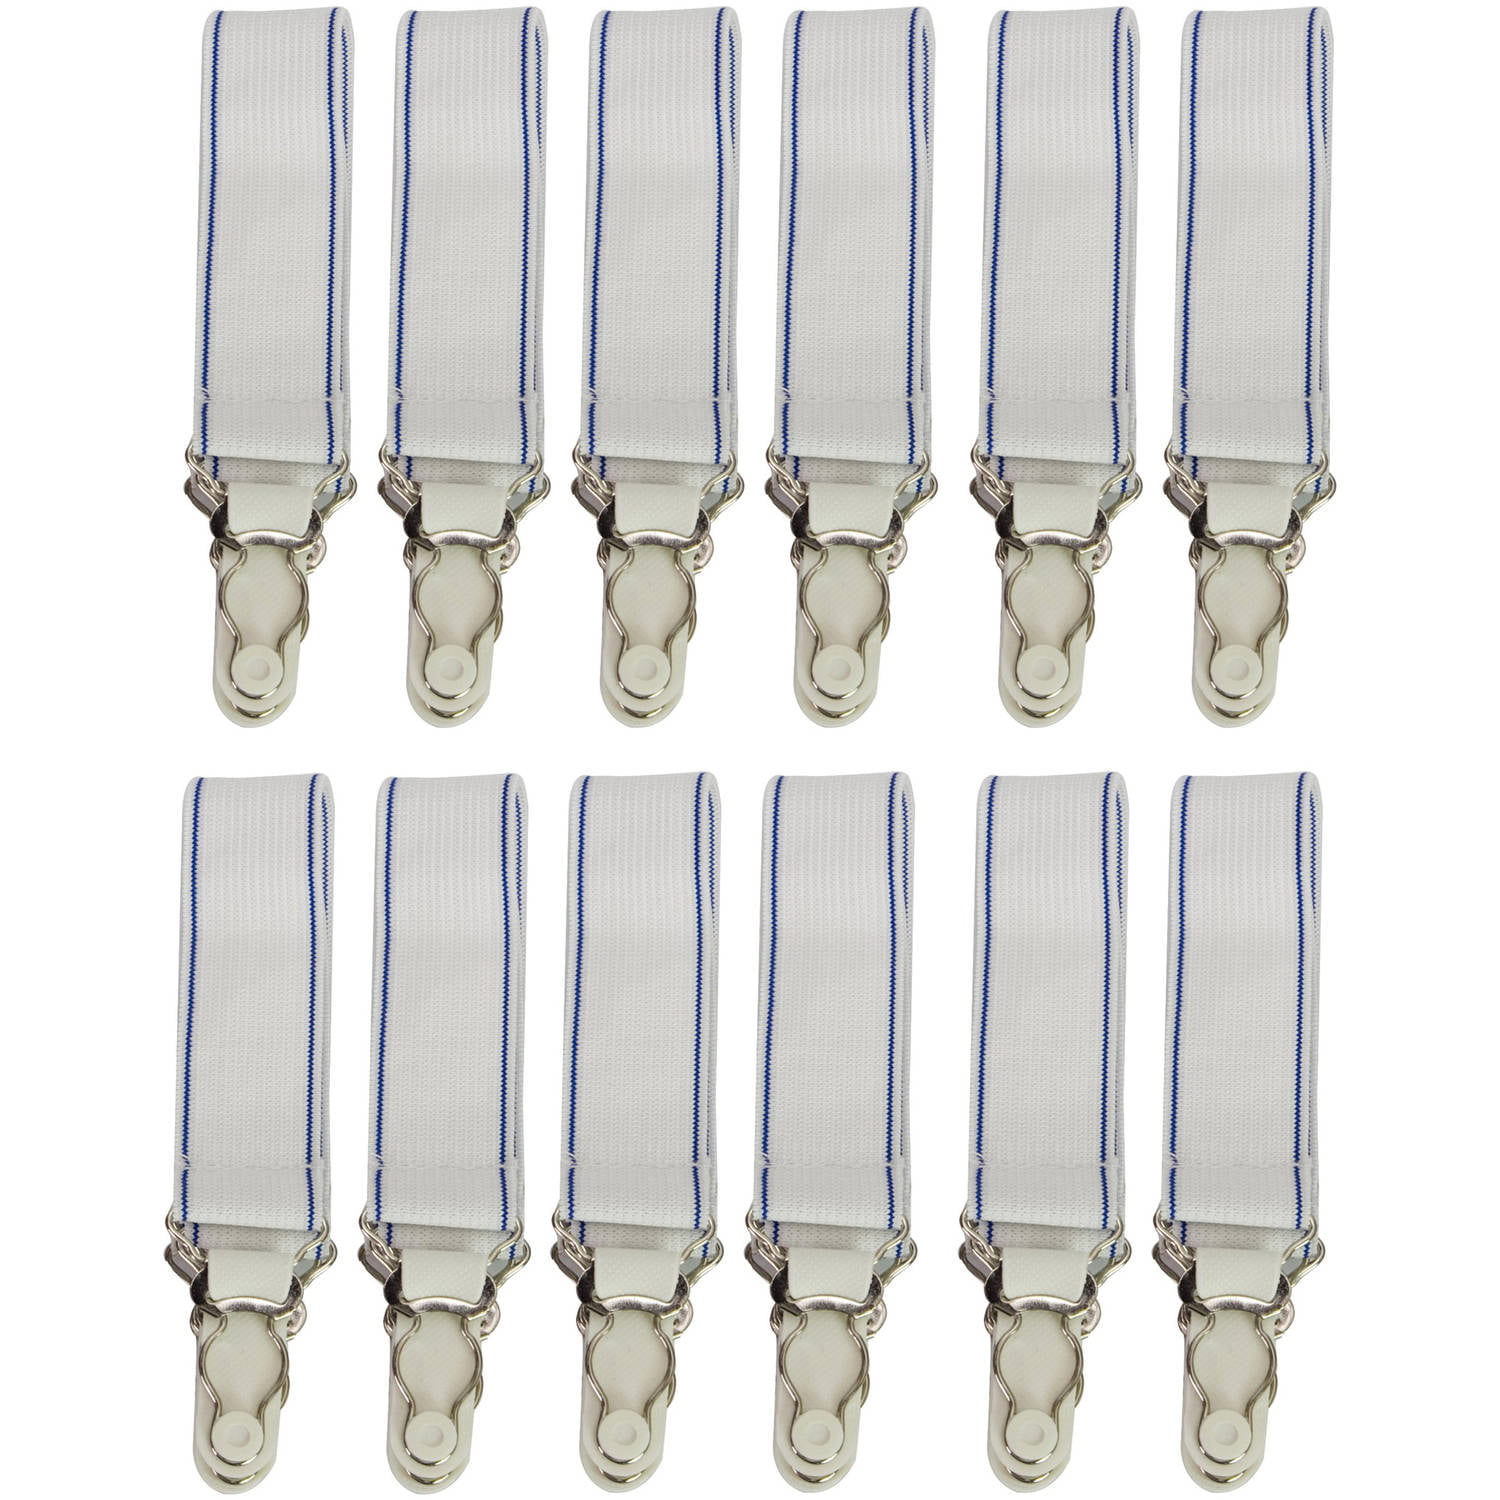 Suspenders Fasteners Clips Gripper Clasps Straps 4 Bed Sheet Grippers 